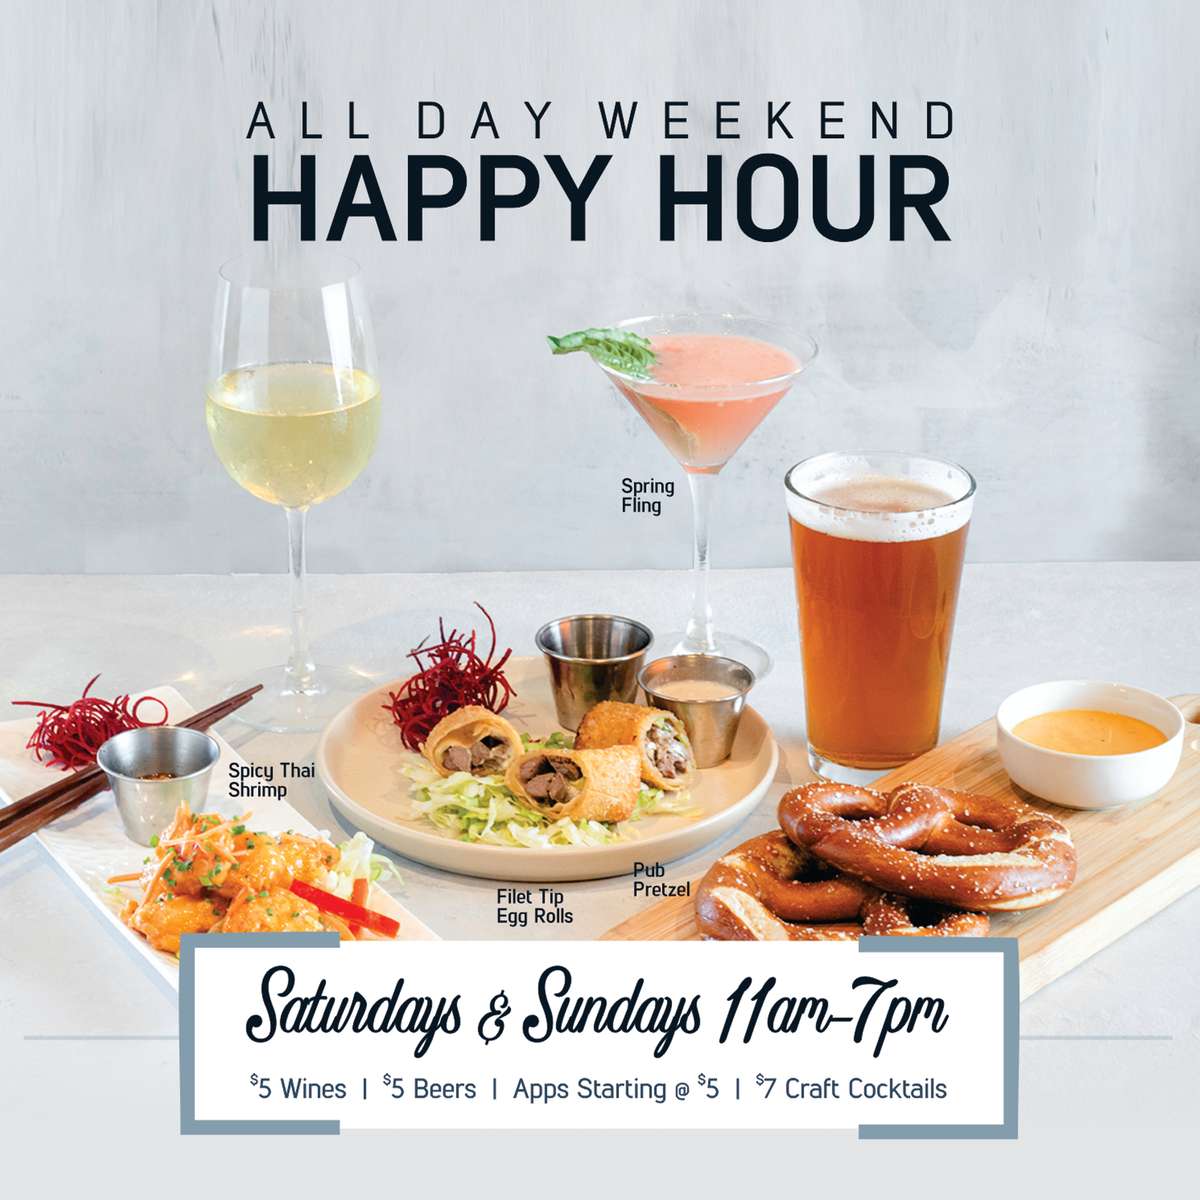 All Weekend Happy Hour At The Sarasota Grillsmith